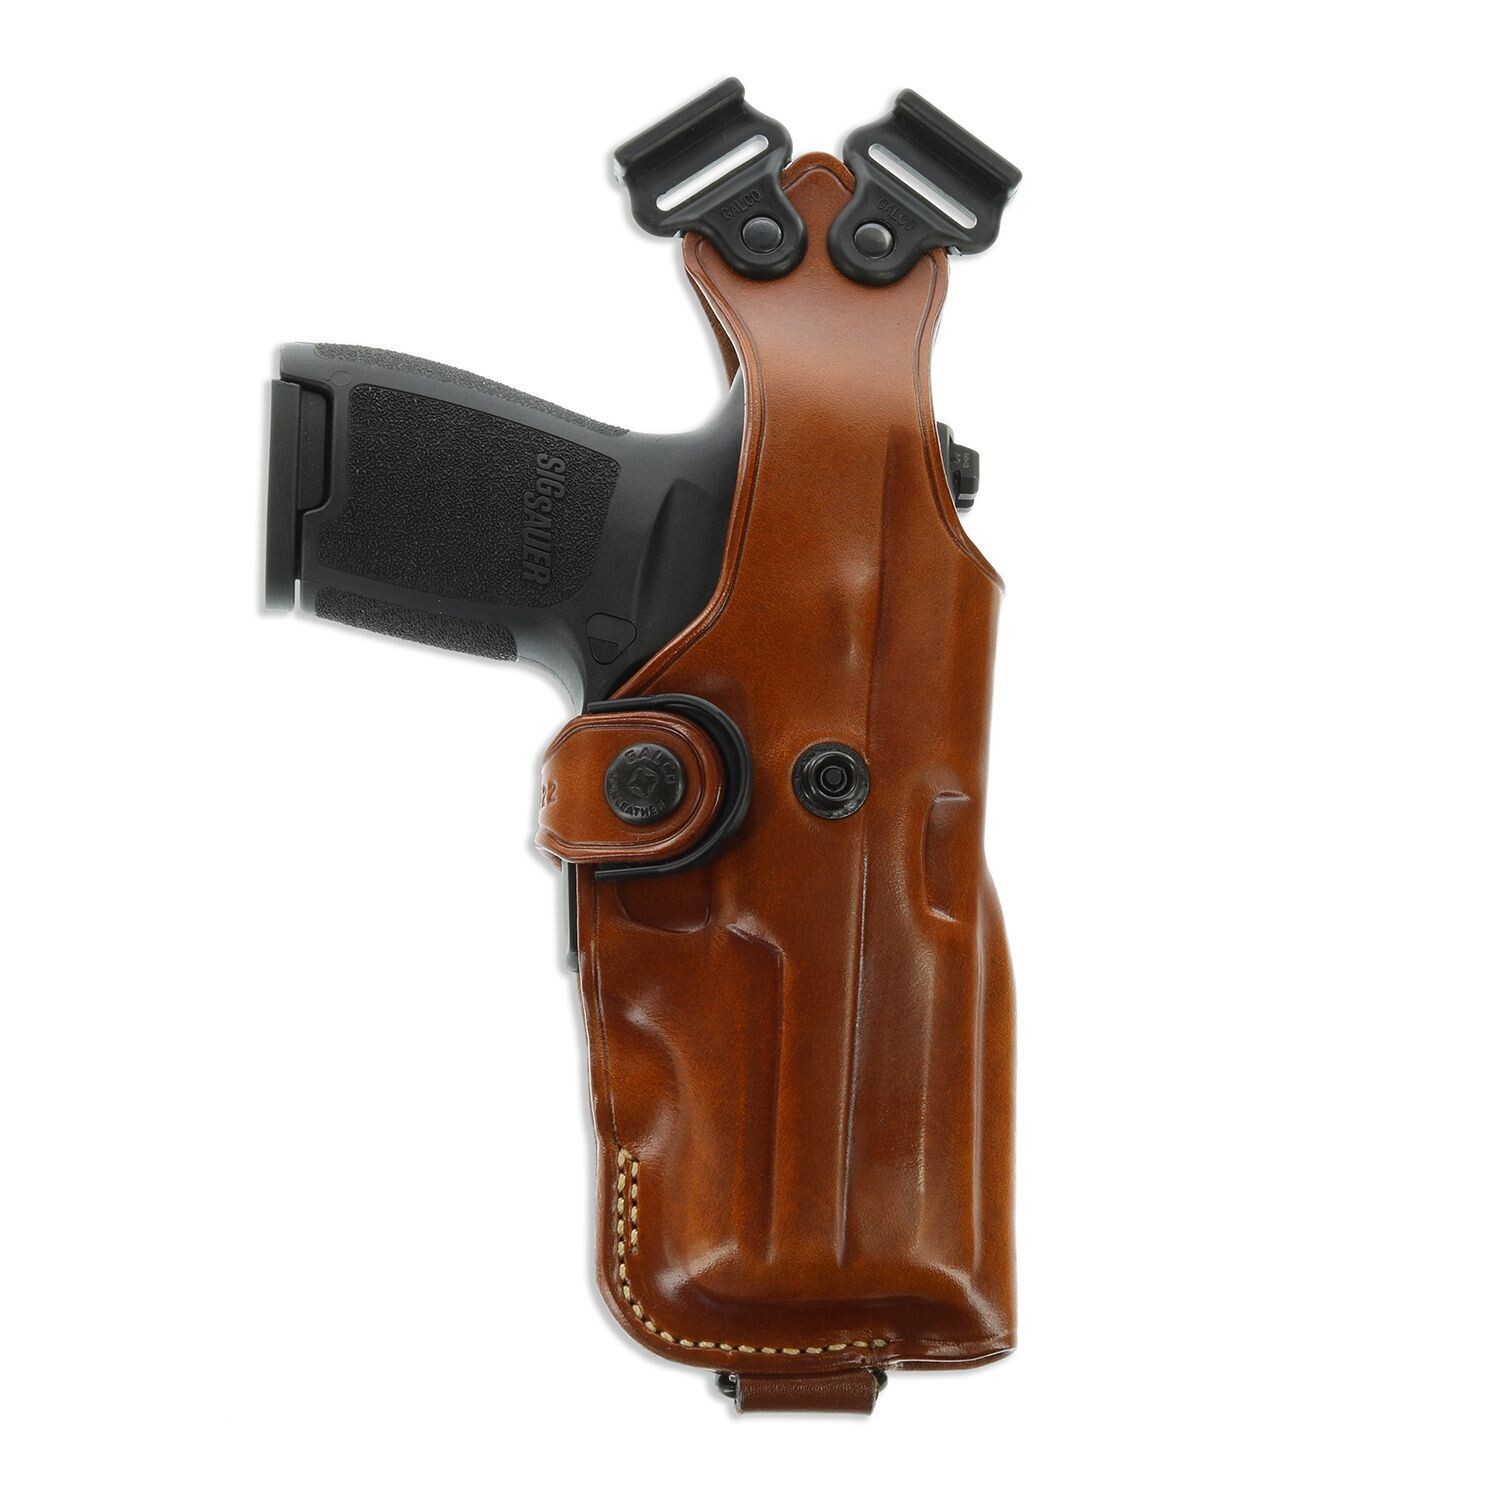 VHS 3.0 Holster Component
Galco Gunleather